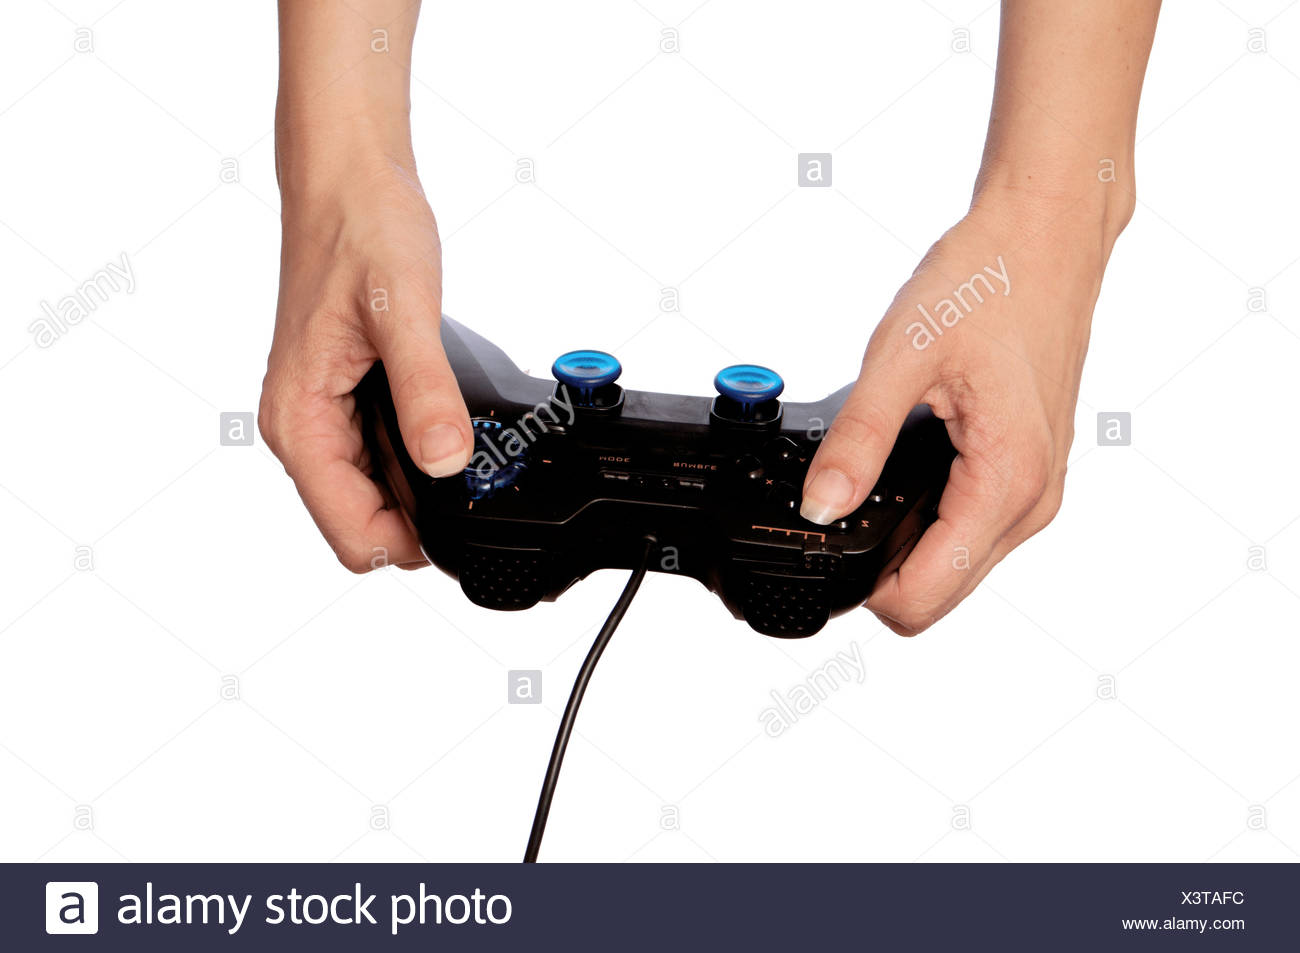 Ps2 Games Stock Photos & Ps2 Games Stock Images - Alamy